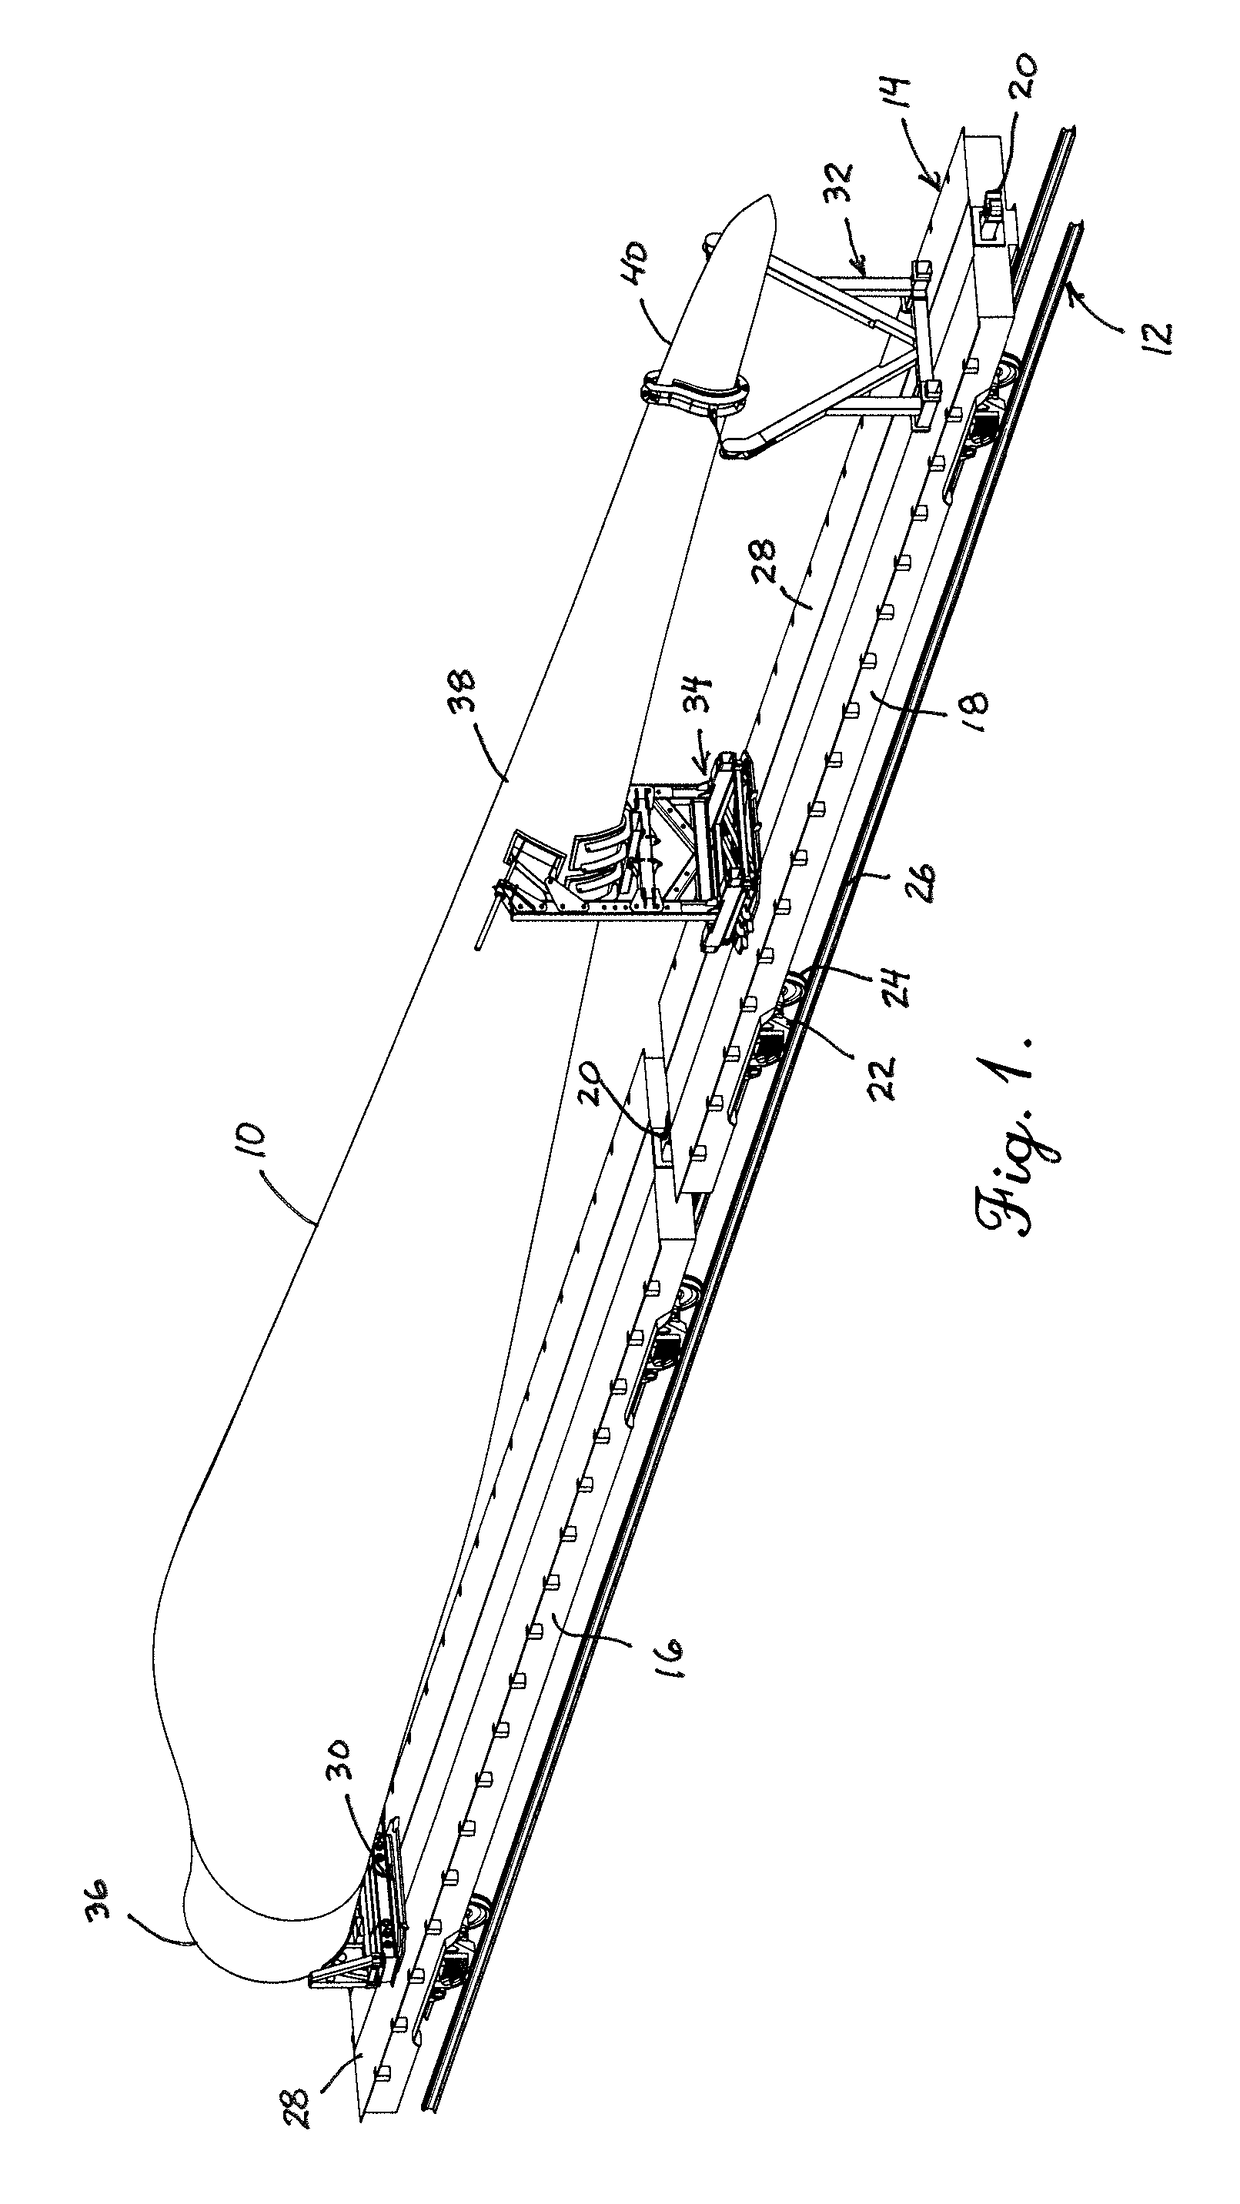 Railcar fixtures for transportation of wind turbine blades and method involving same